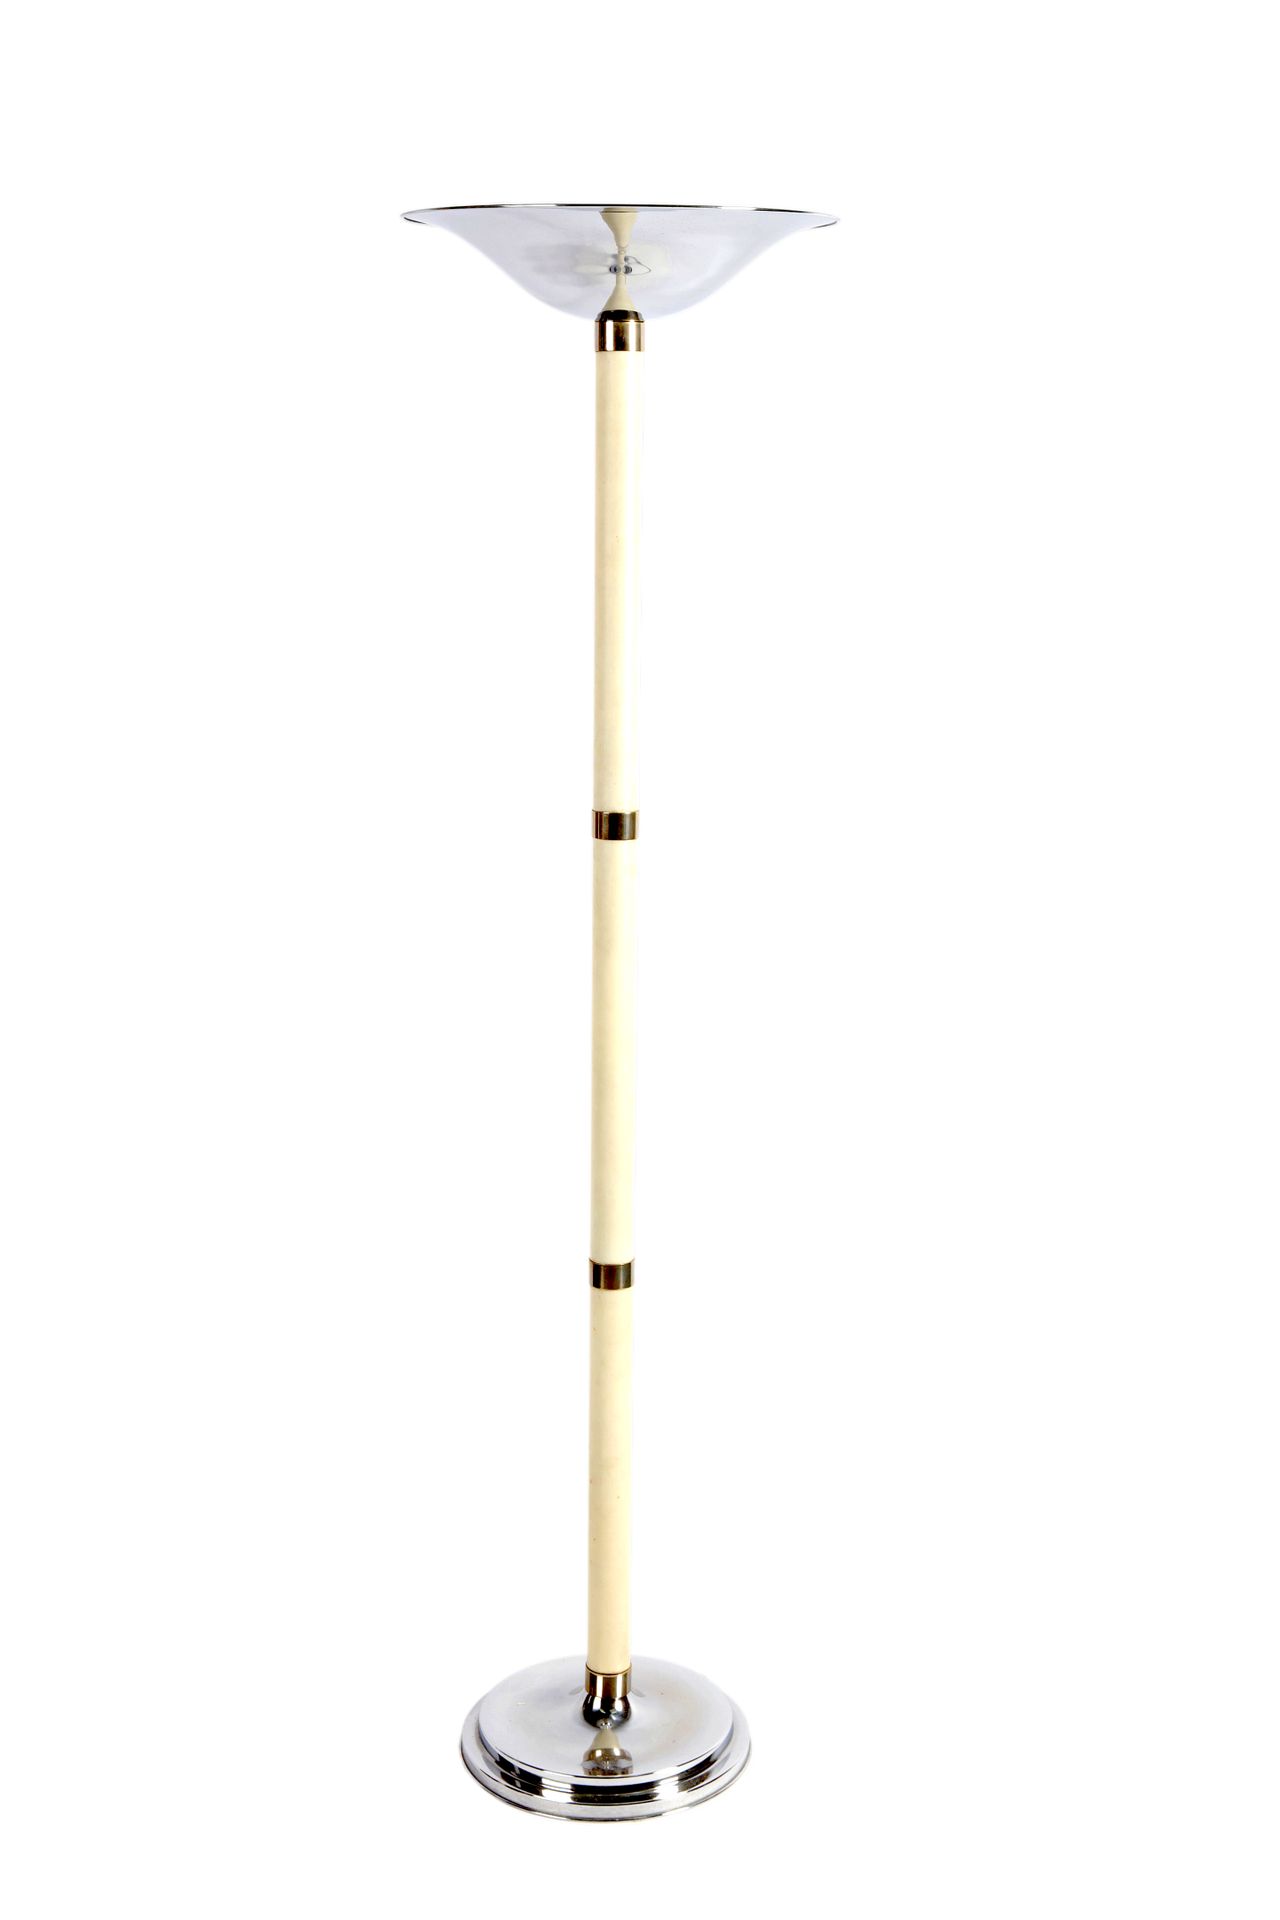 Null Floor lamp covered with beige moleskin, art deco style. Ht: